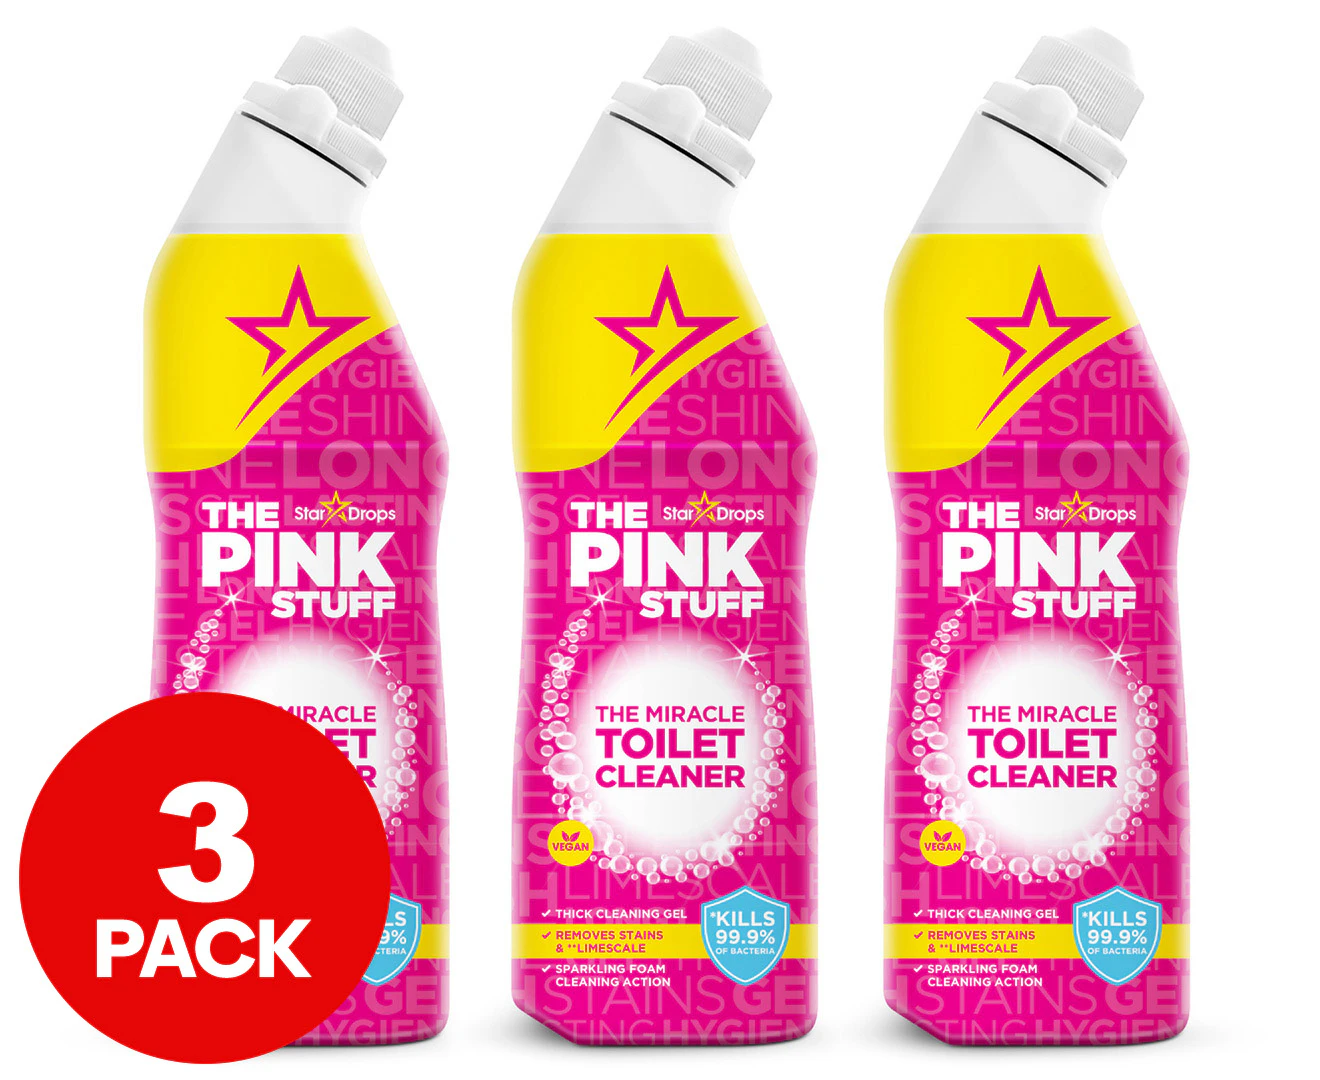 Stardrops - The Pink Stuff - The Miracle Cleaning Indonesia